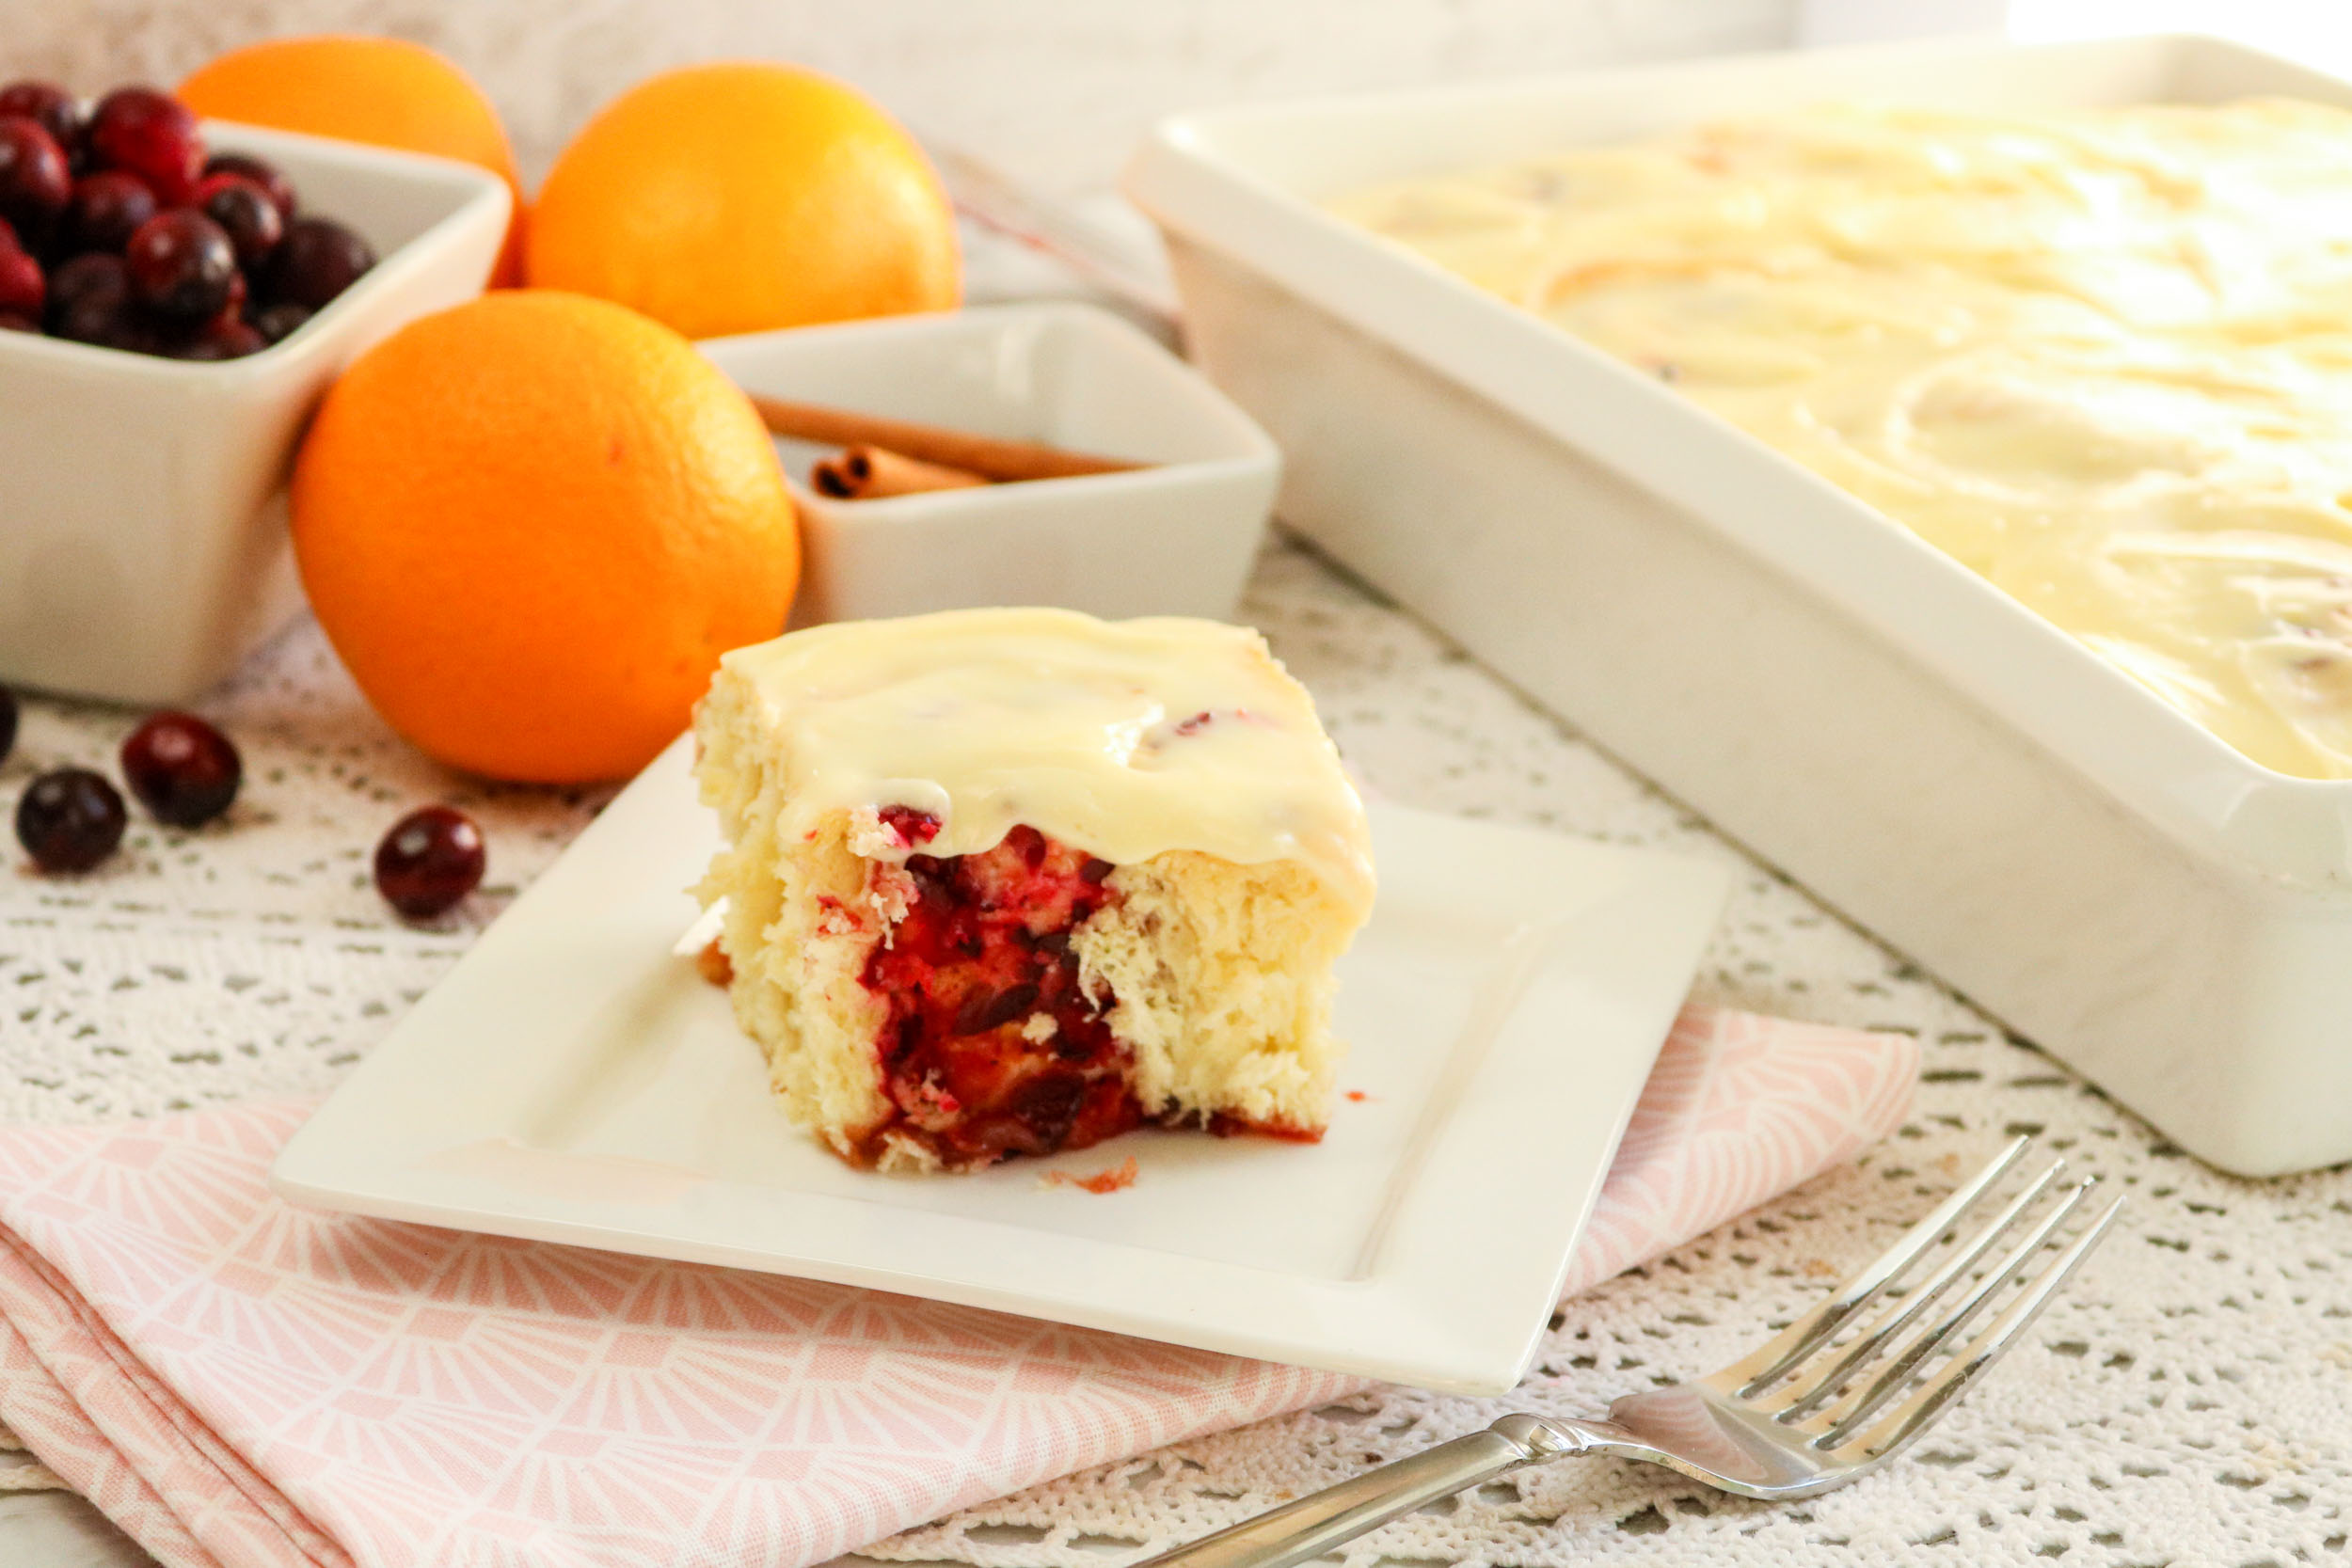 A cranberry orange roll in front of a baking dish filled with rolls.